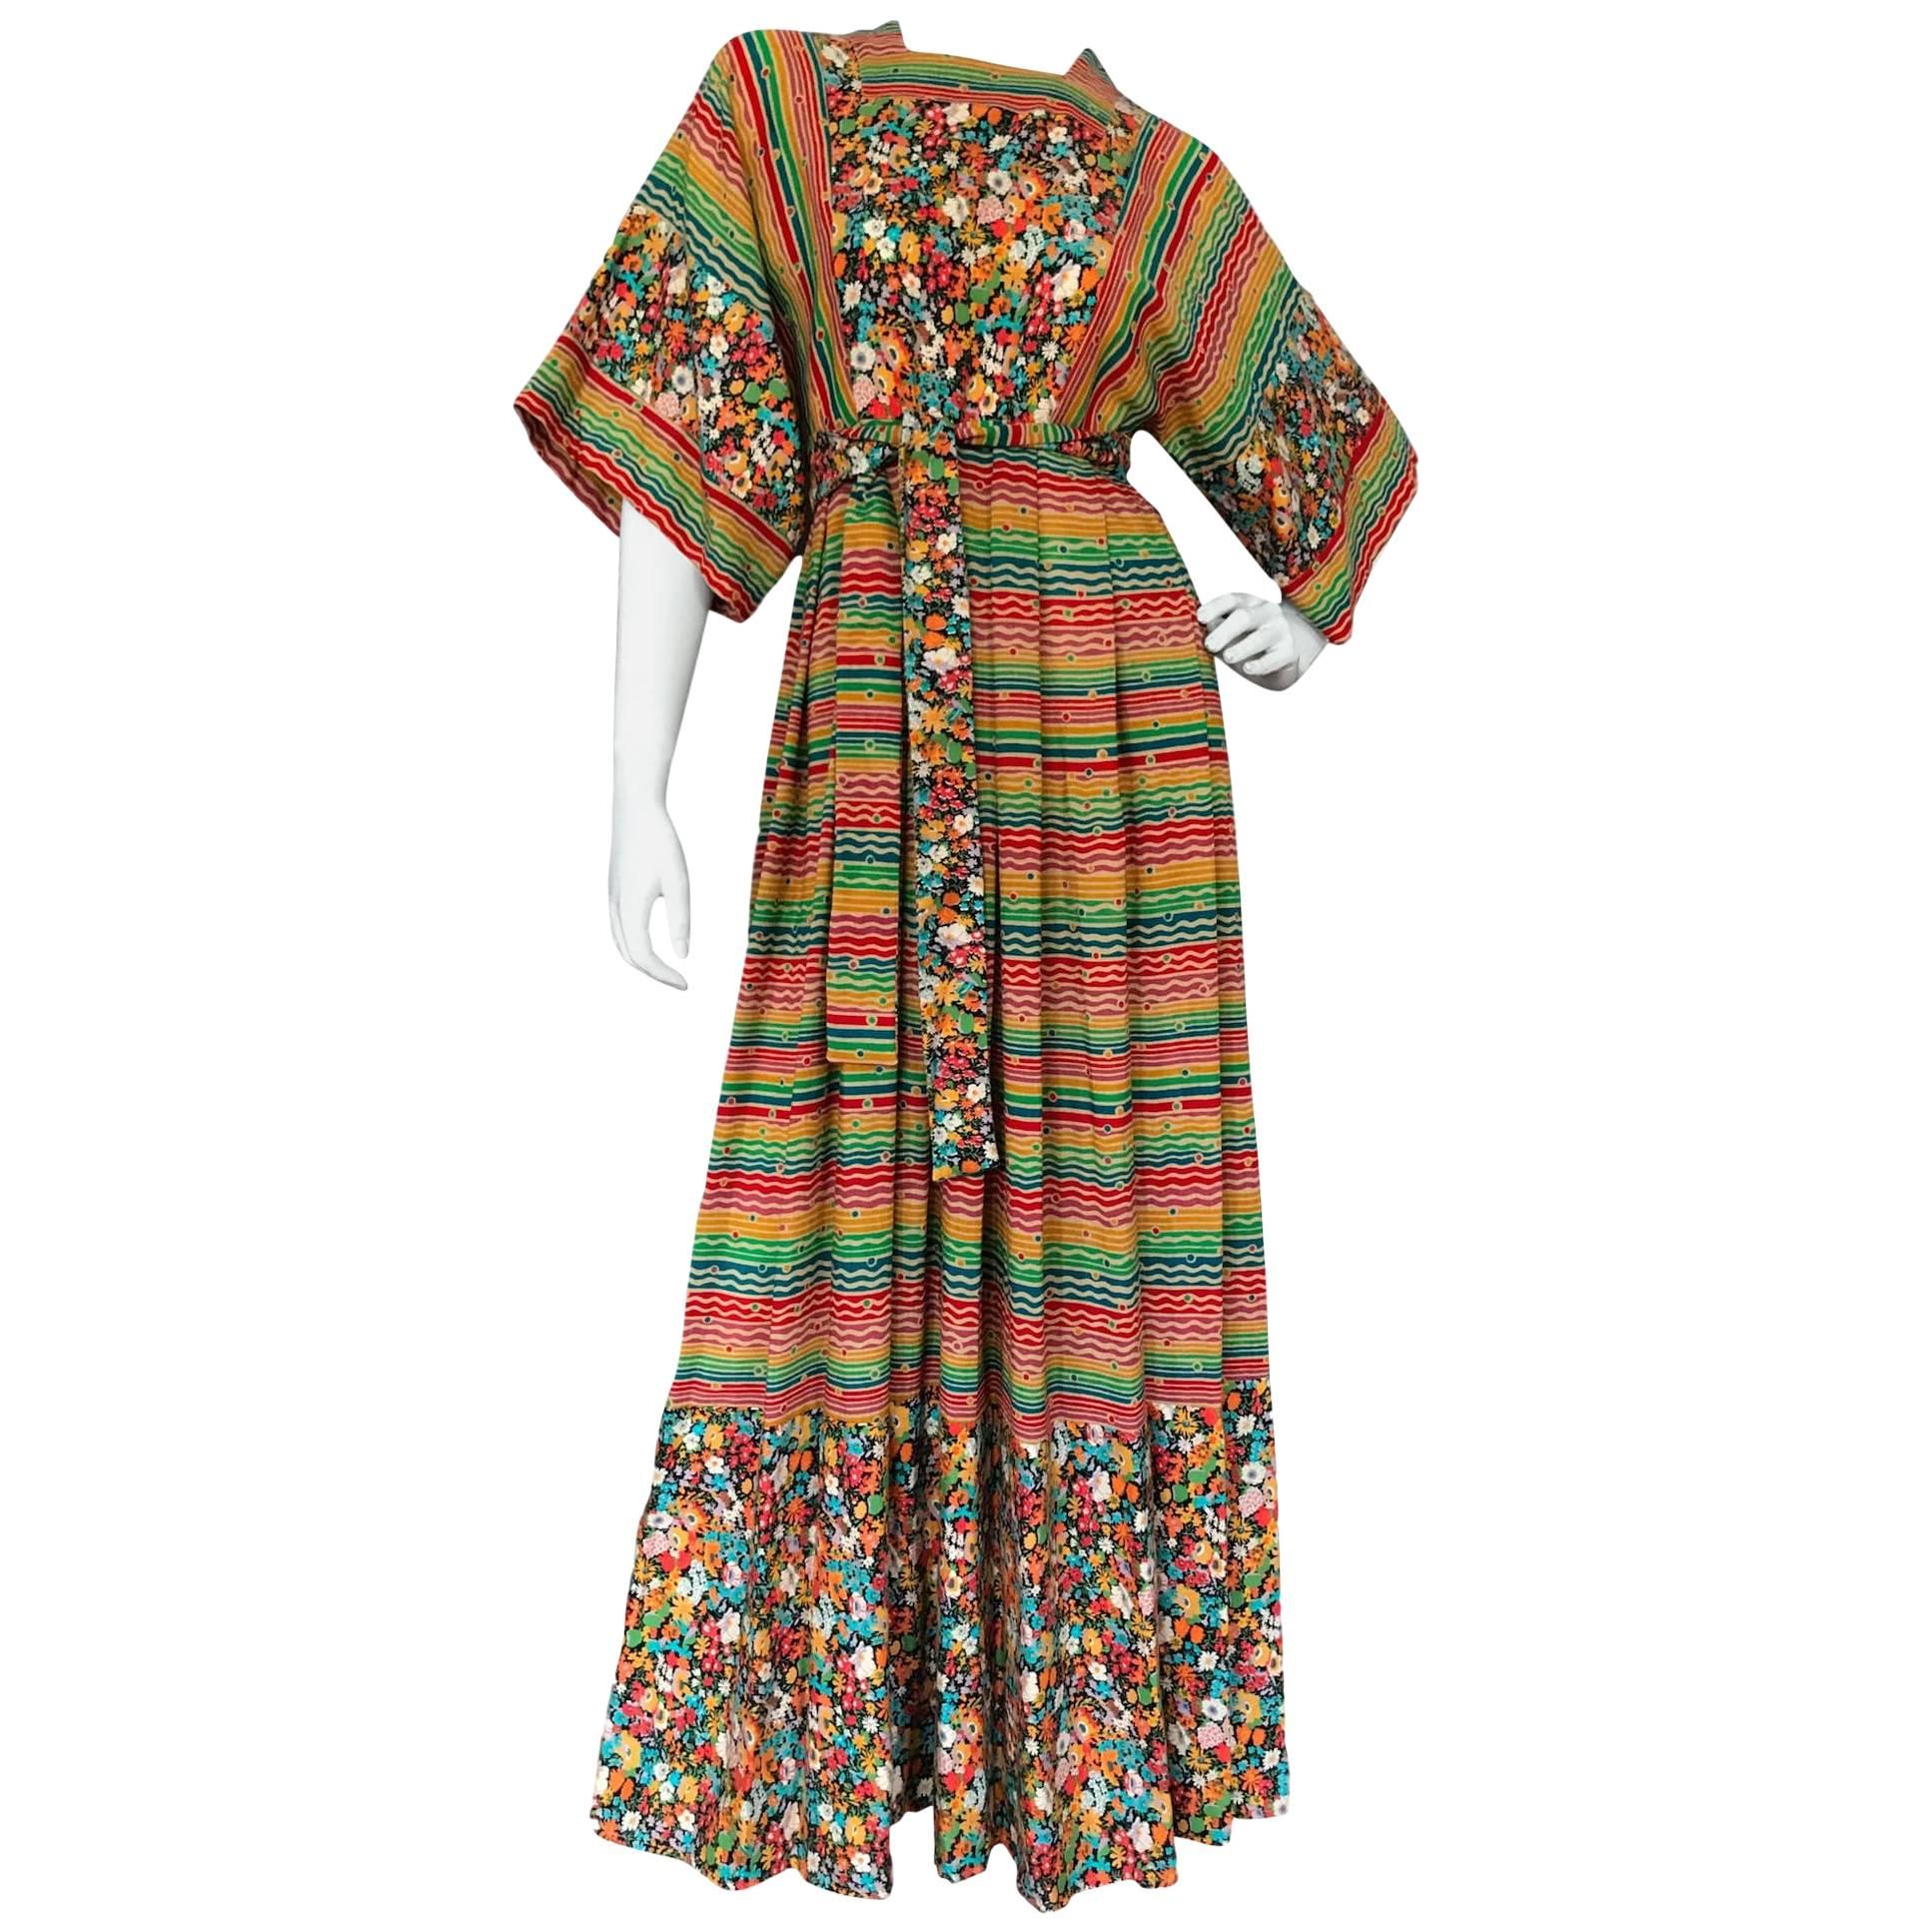 1970s Hildebrand at Liberty 100% Wool Floral and Striped Print Maxi Dress  For Sale